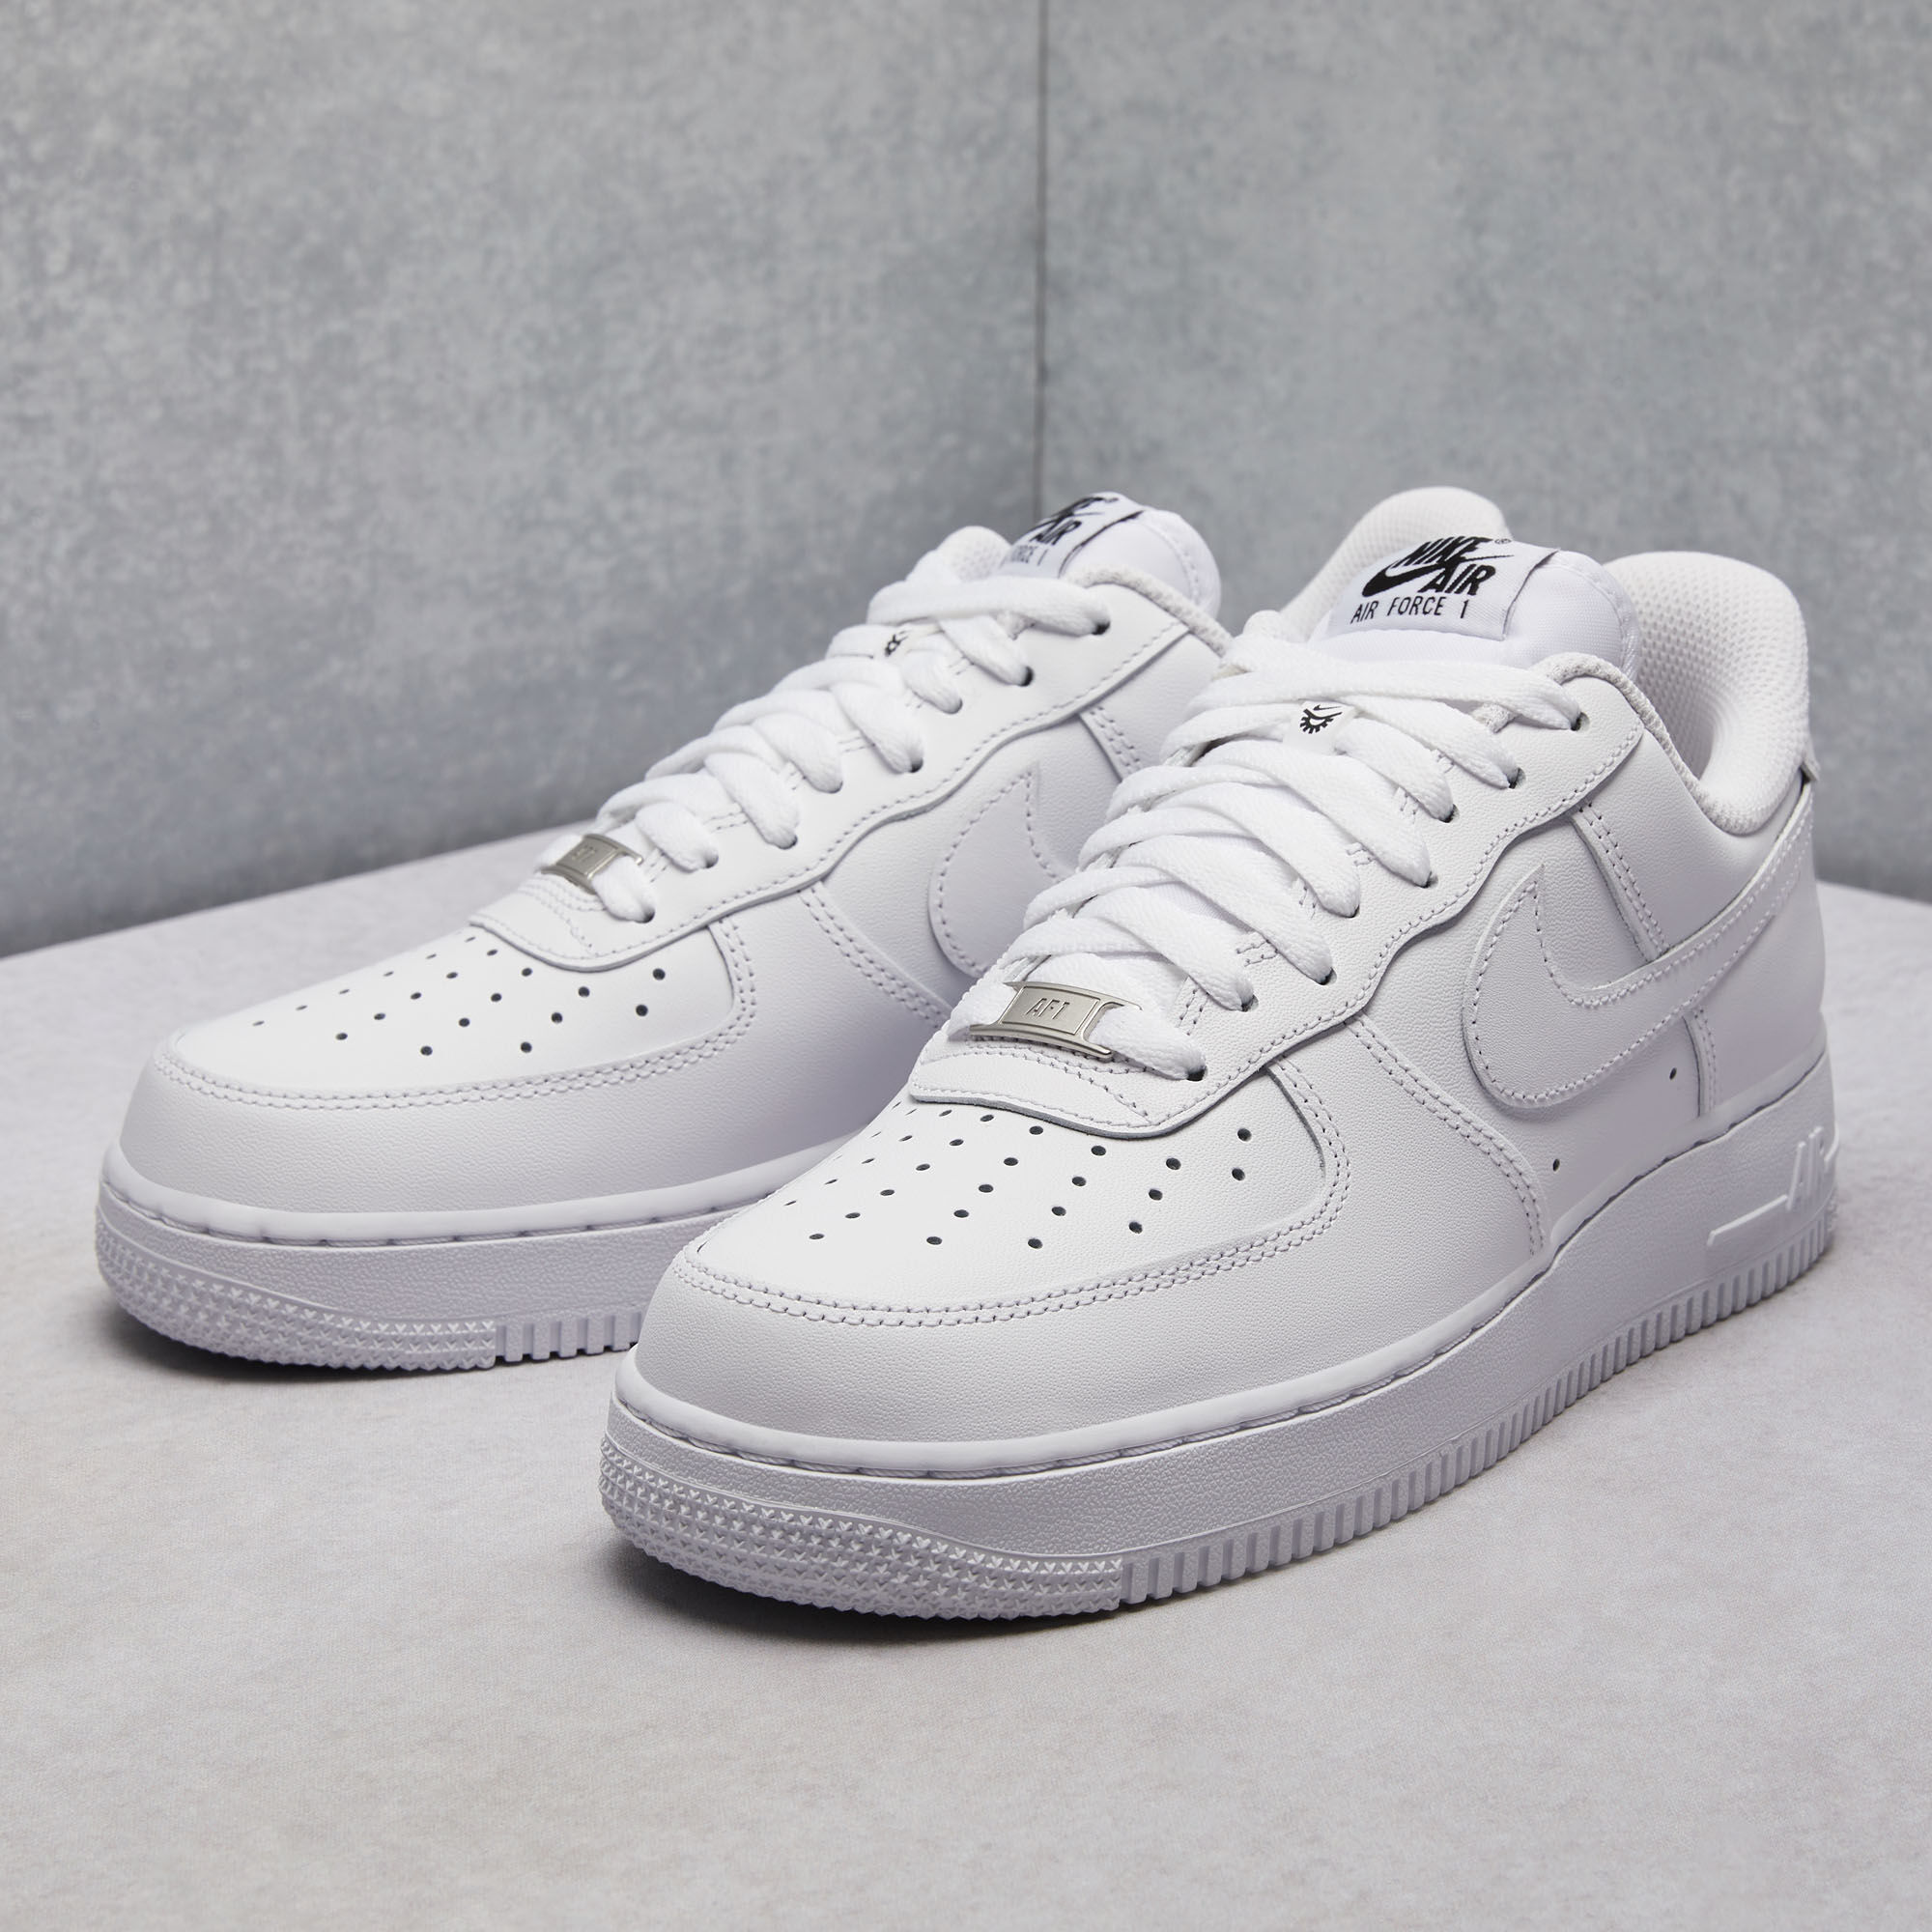 Air Force 1 '07 Flyease Shoe